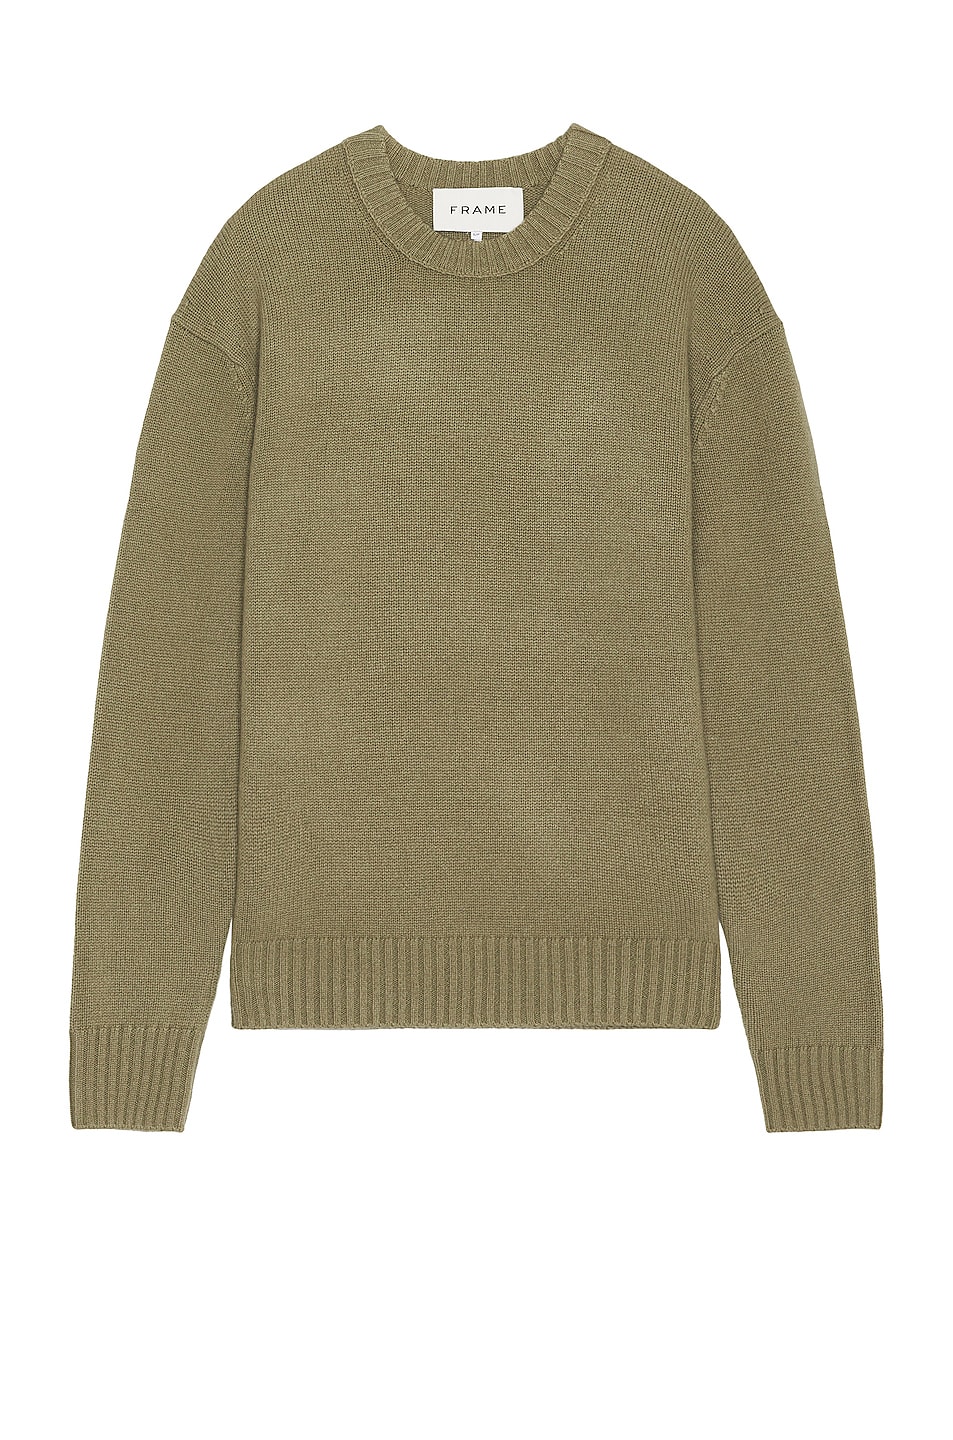 Image 1 of FRAME Cashmere Sweater in Khaki Green